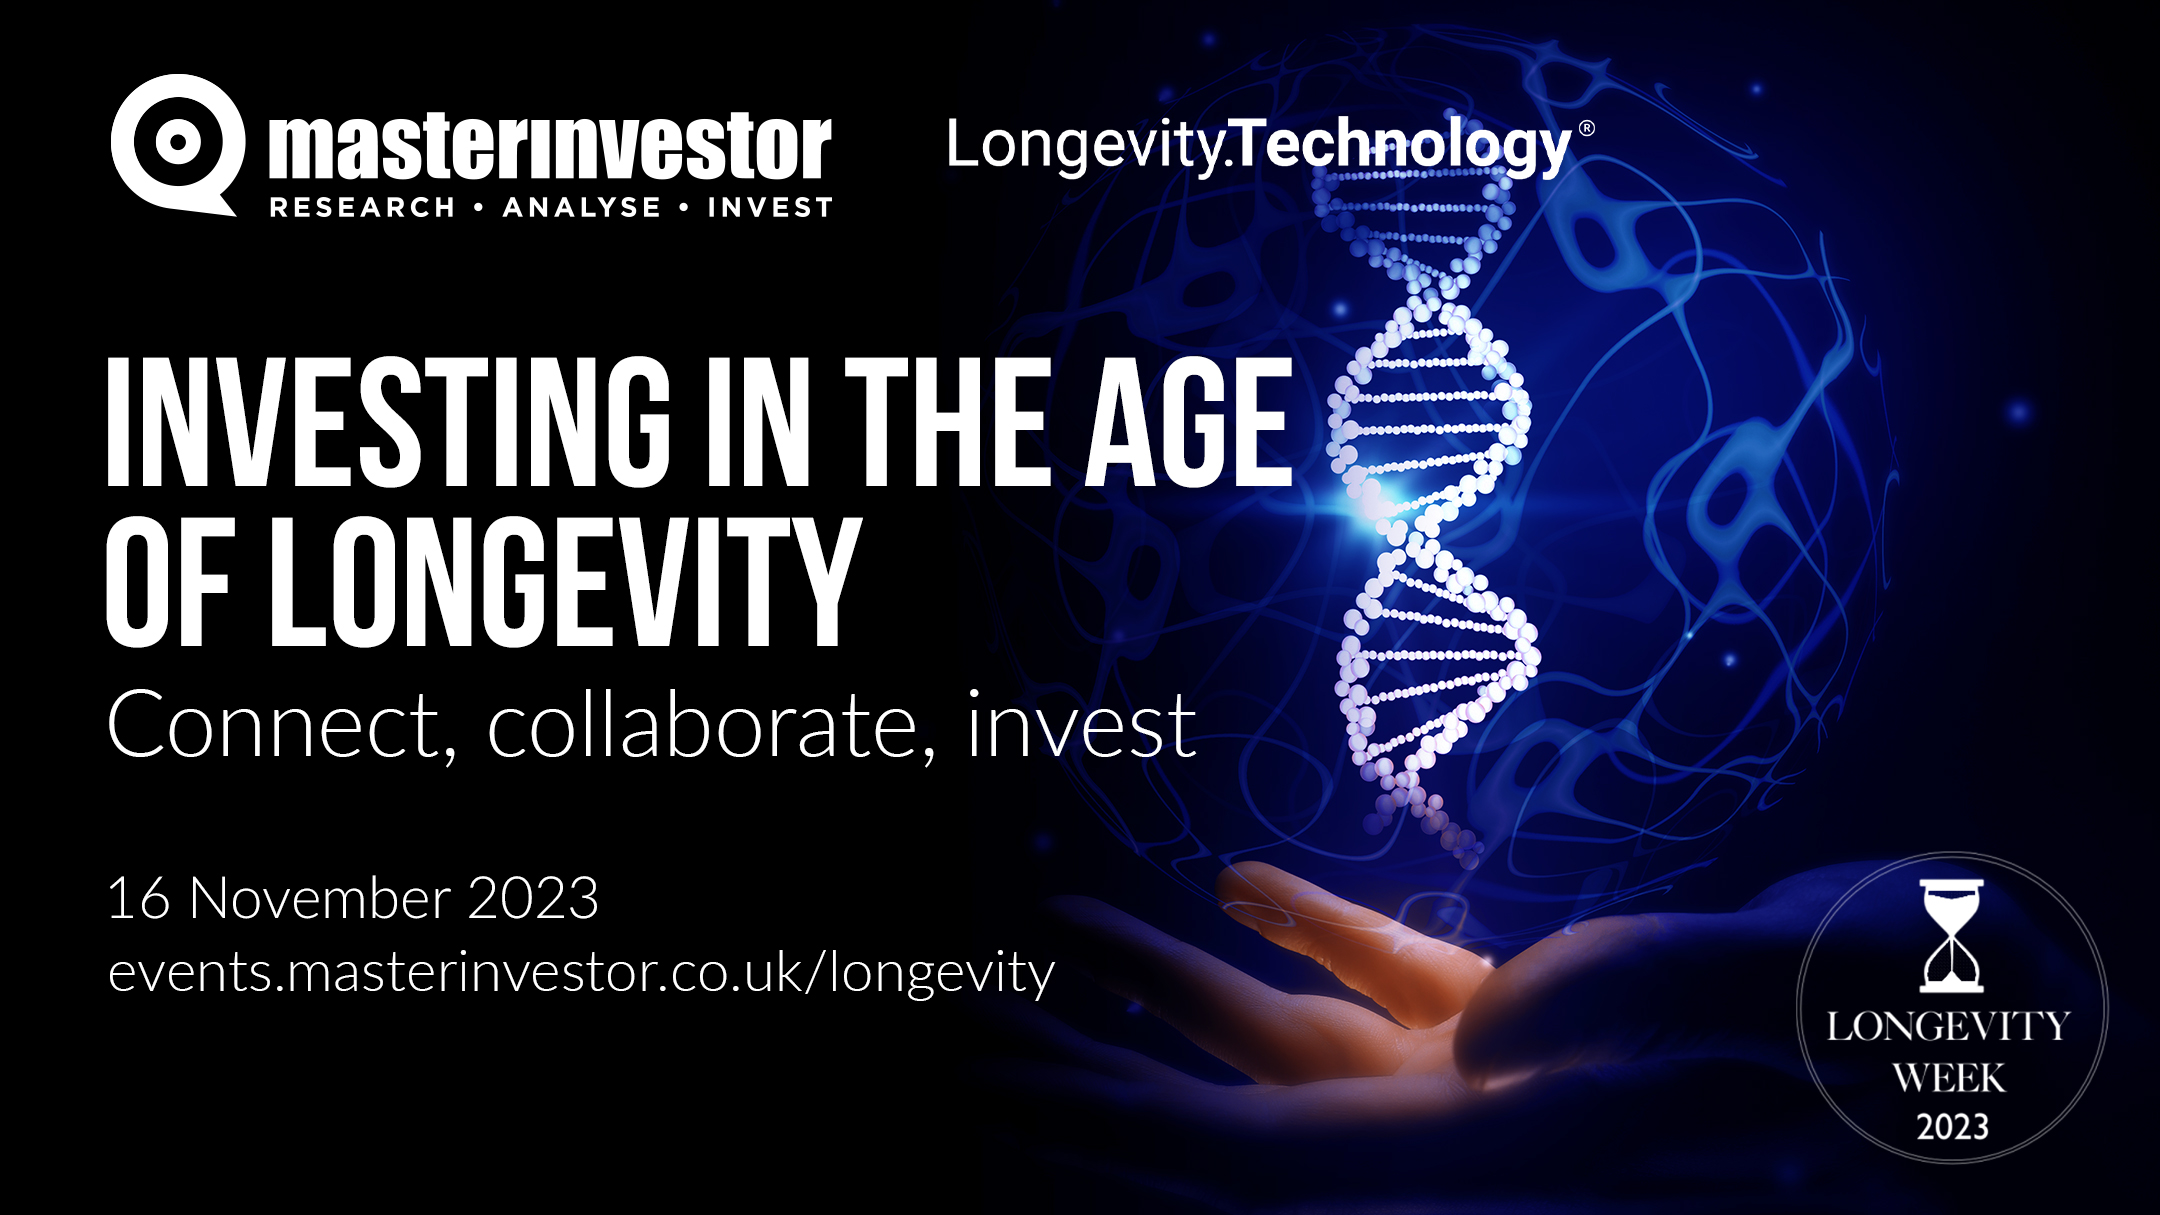 Investing in the Age of Longevity 2023